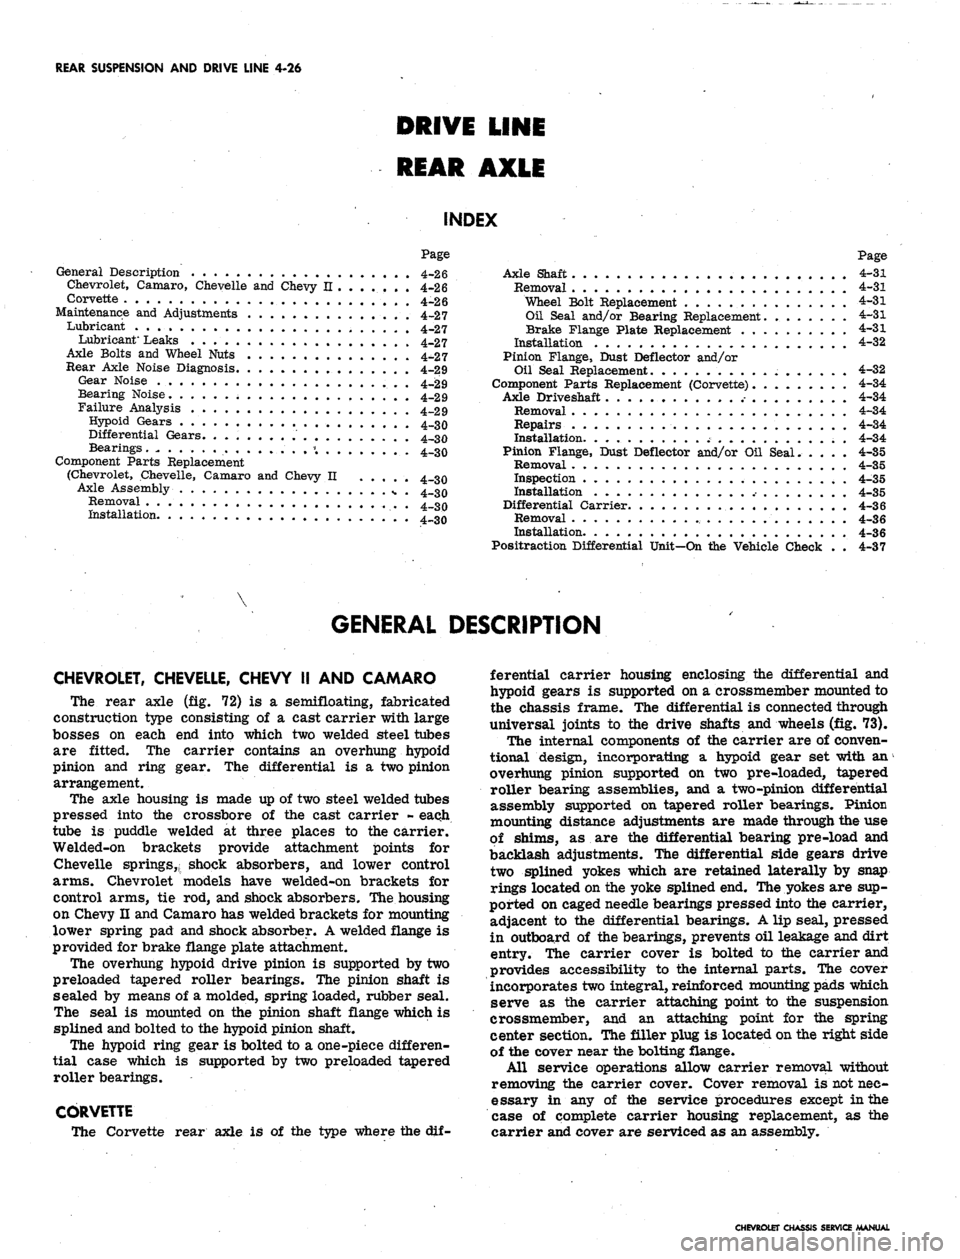 CHEVROLET CAMARO 1967 1.G Chassis Workshop Manual 
REAR SUSPENSION
 AND
 DRIVE LINE
 4-26

DRIVE LINE

REAR AXIE

INDEX

Page

General
 Description
 4-26

Chevrolet,
 Camaro,
 Chevelle
 and
 Chevy
 II 4-26

Corvette
 4-26

Maintenance
 and
 Adjustmen